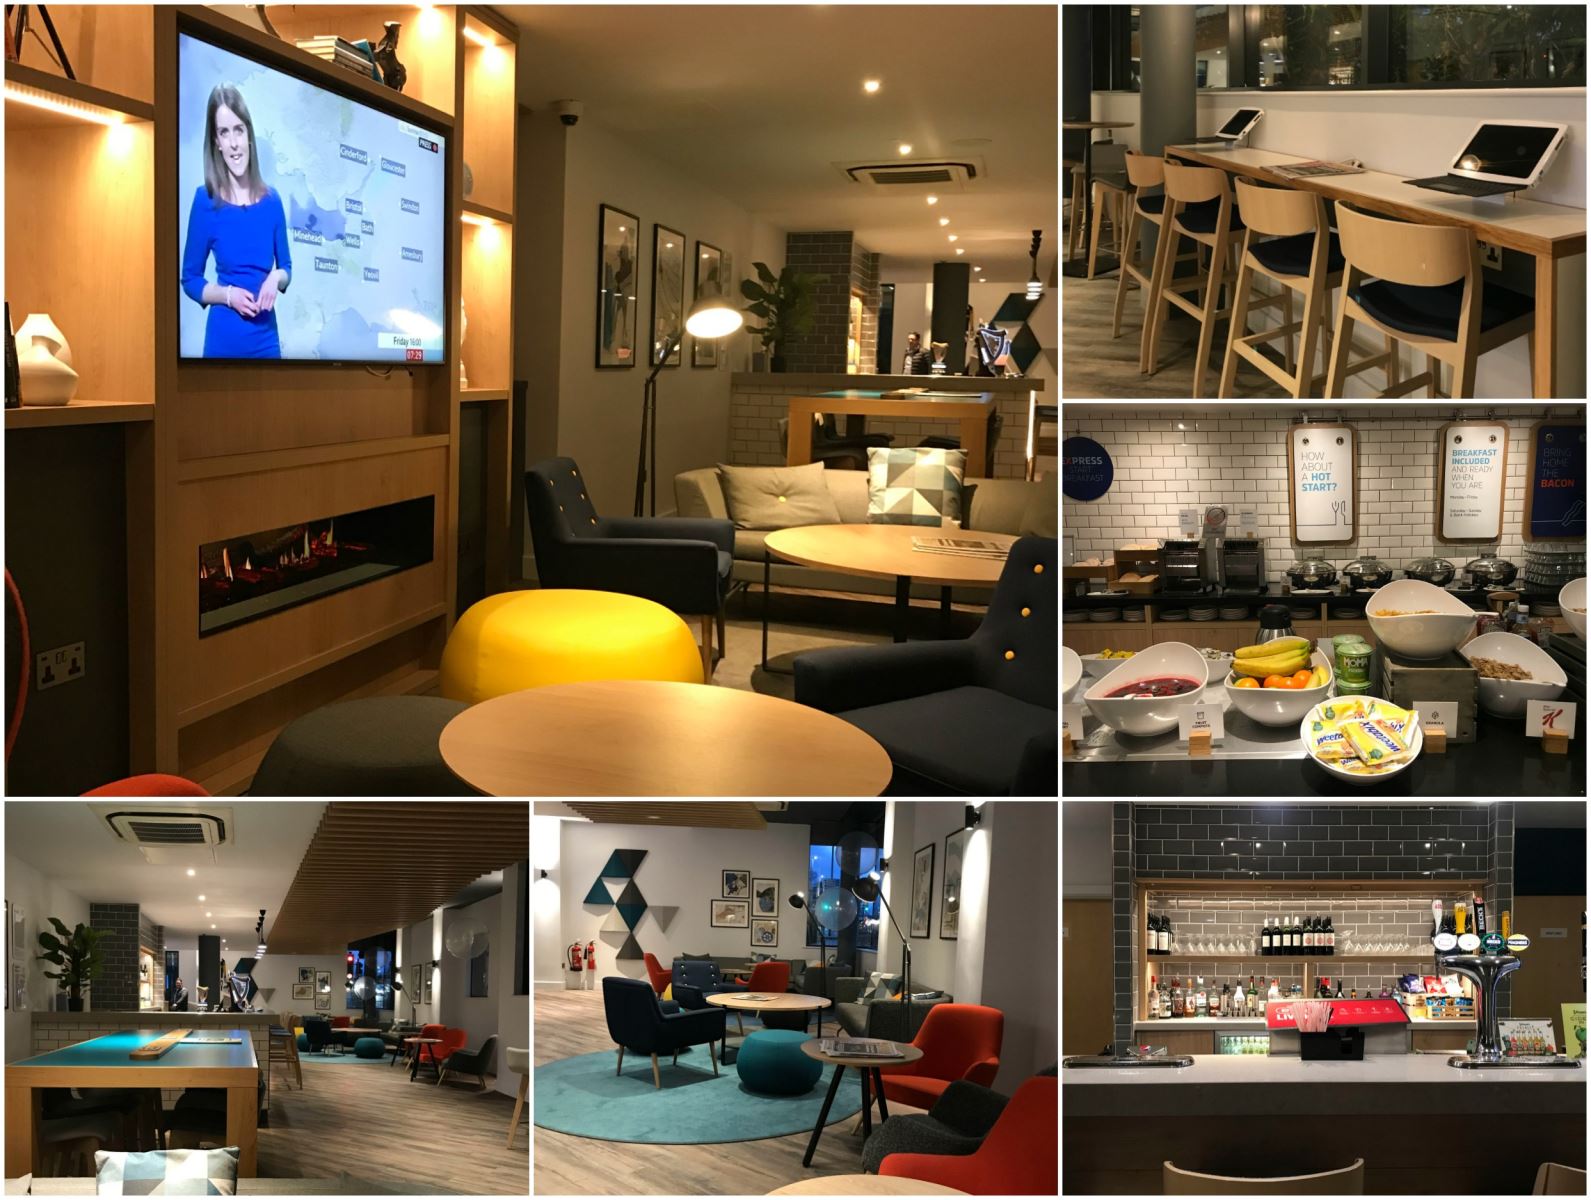 Image collage - left to right across TV in bedroom, workspace with laptops, reception area and bar